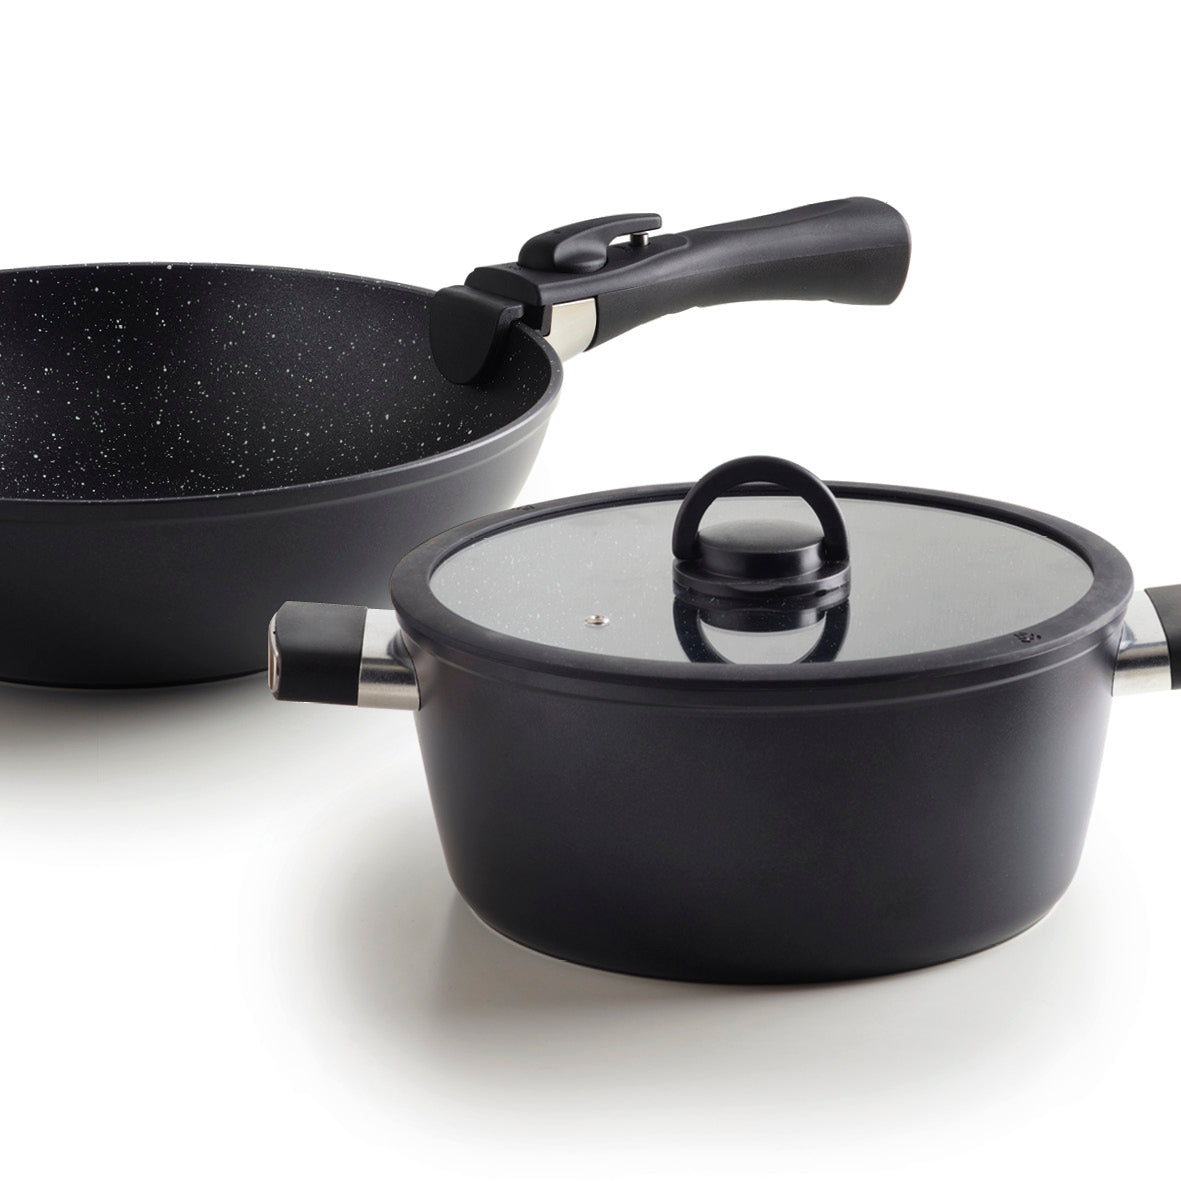 Stackable cookware set in aluminium with removable handle 5 pieces - Black